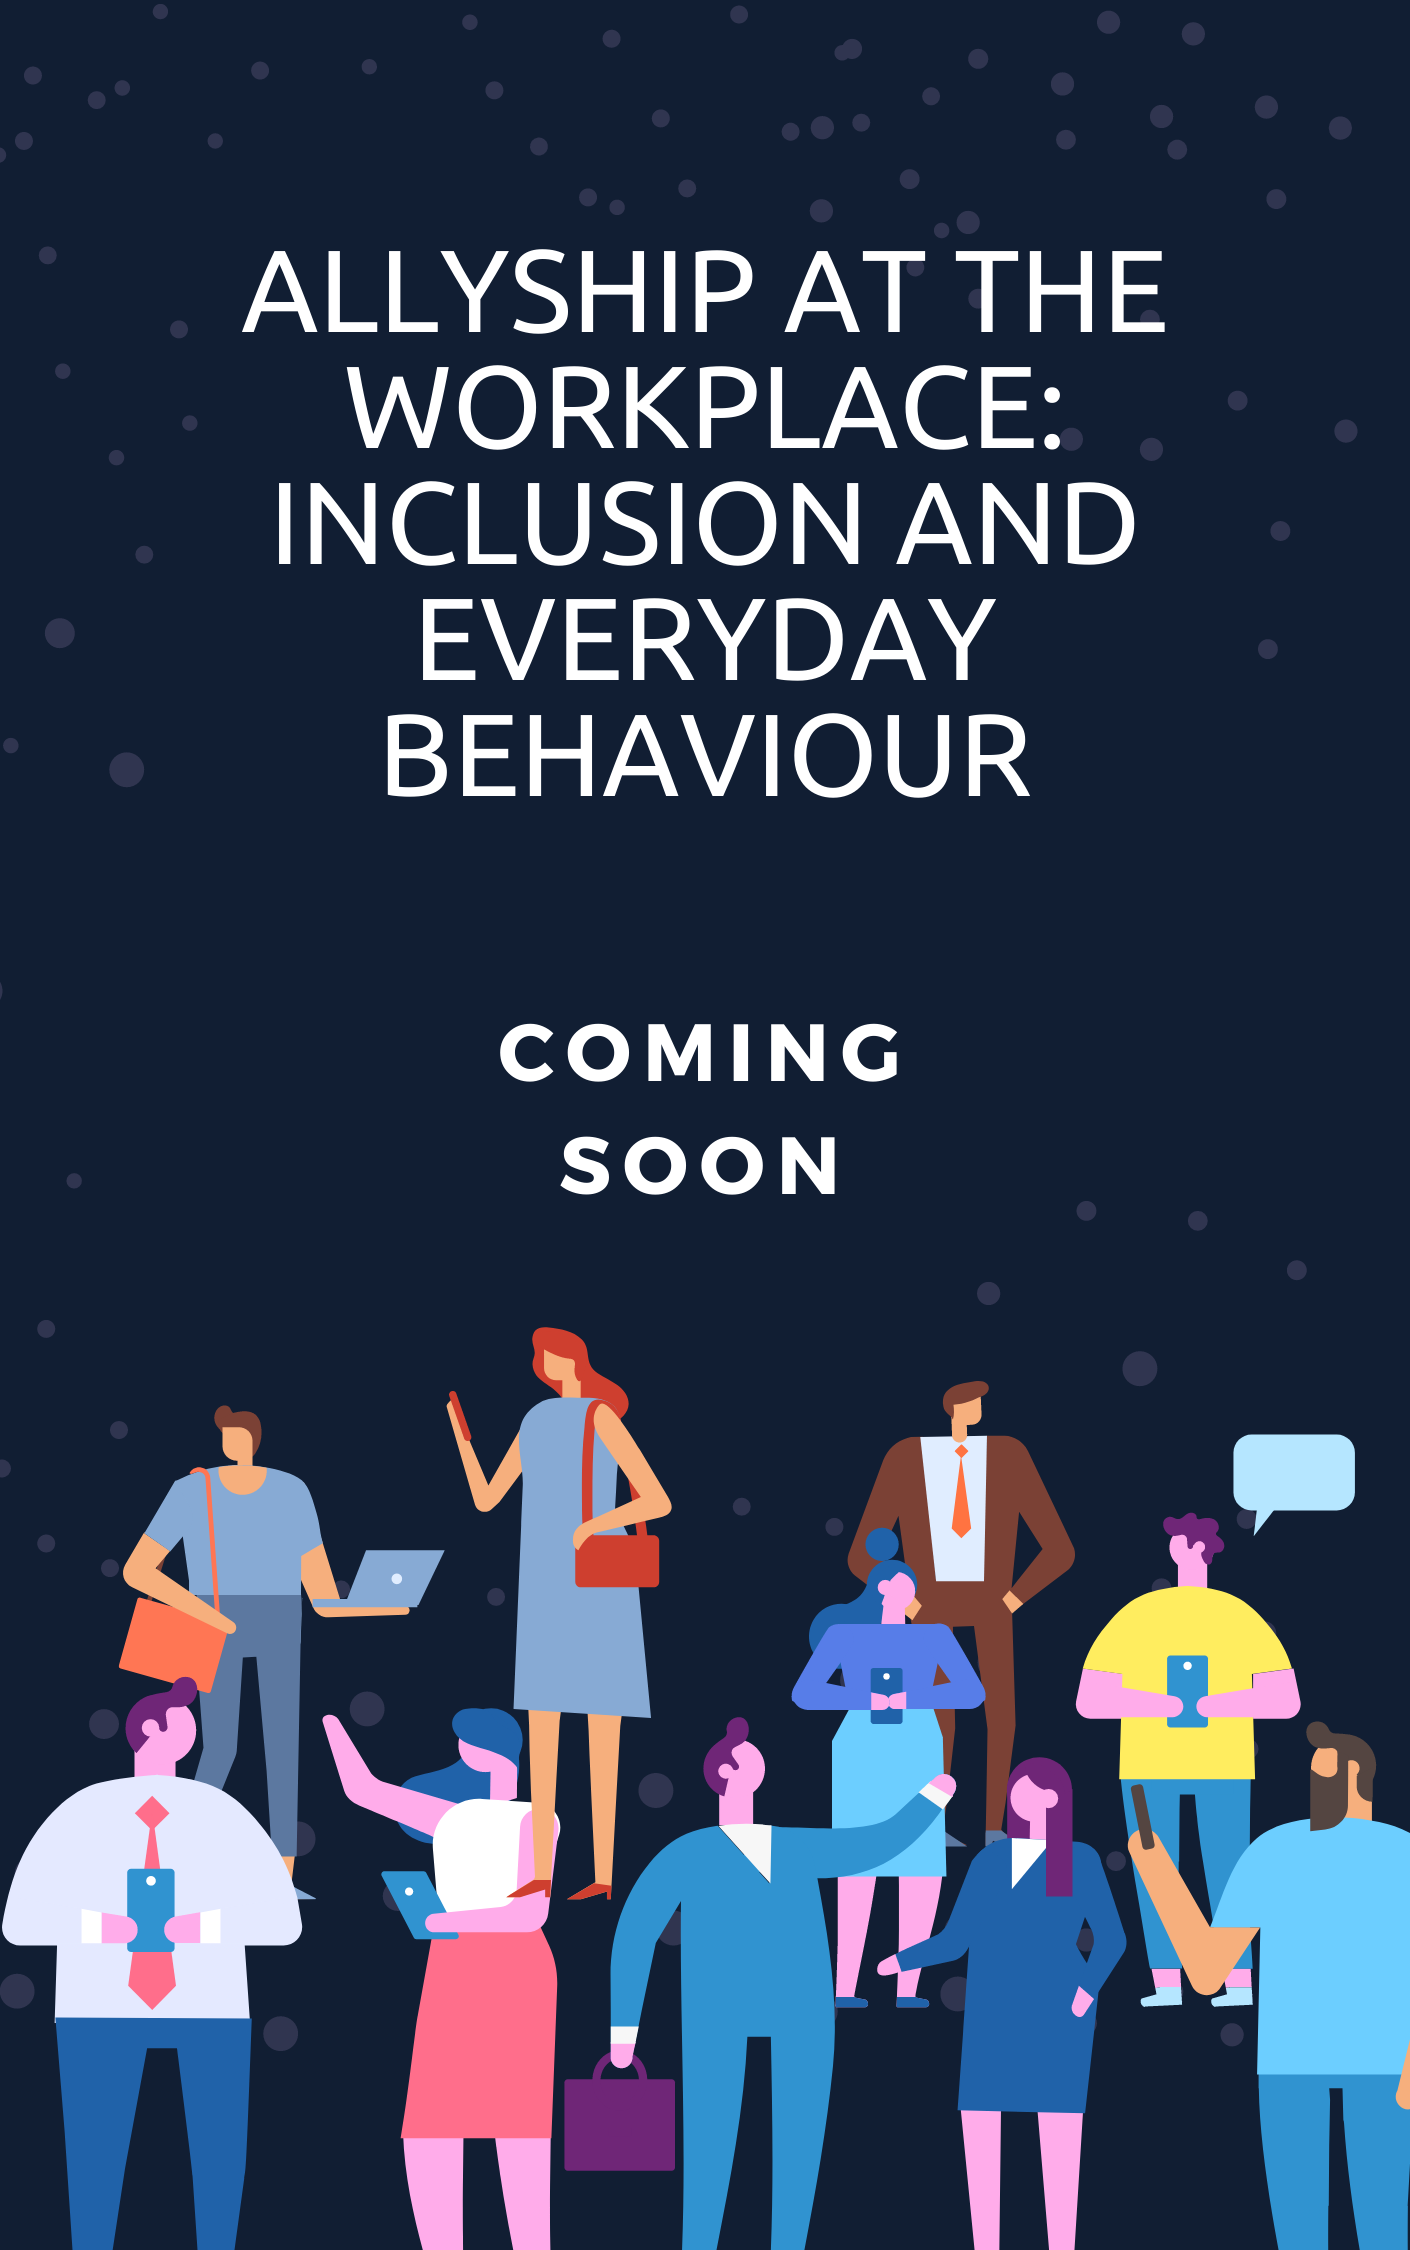 Allyship at the workplace: Inclusion and everyday behaviour